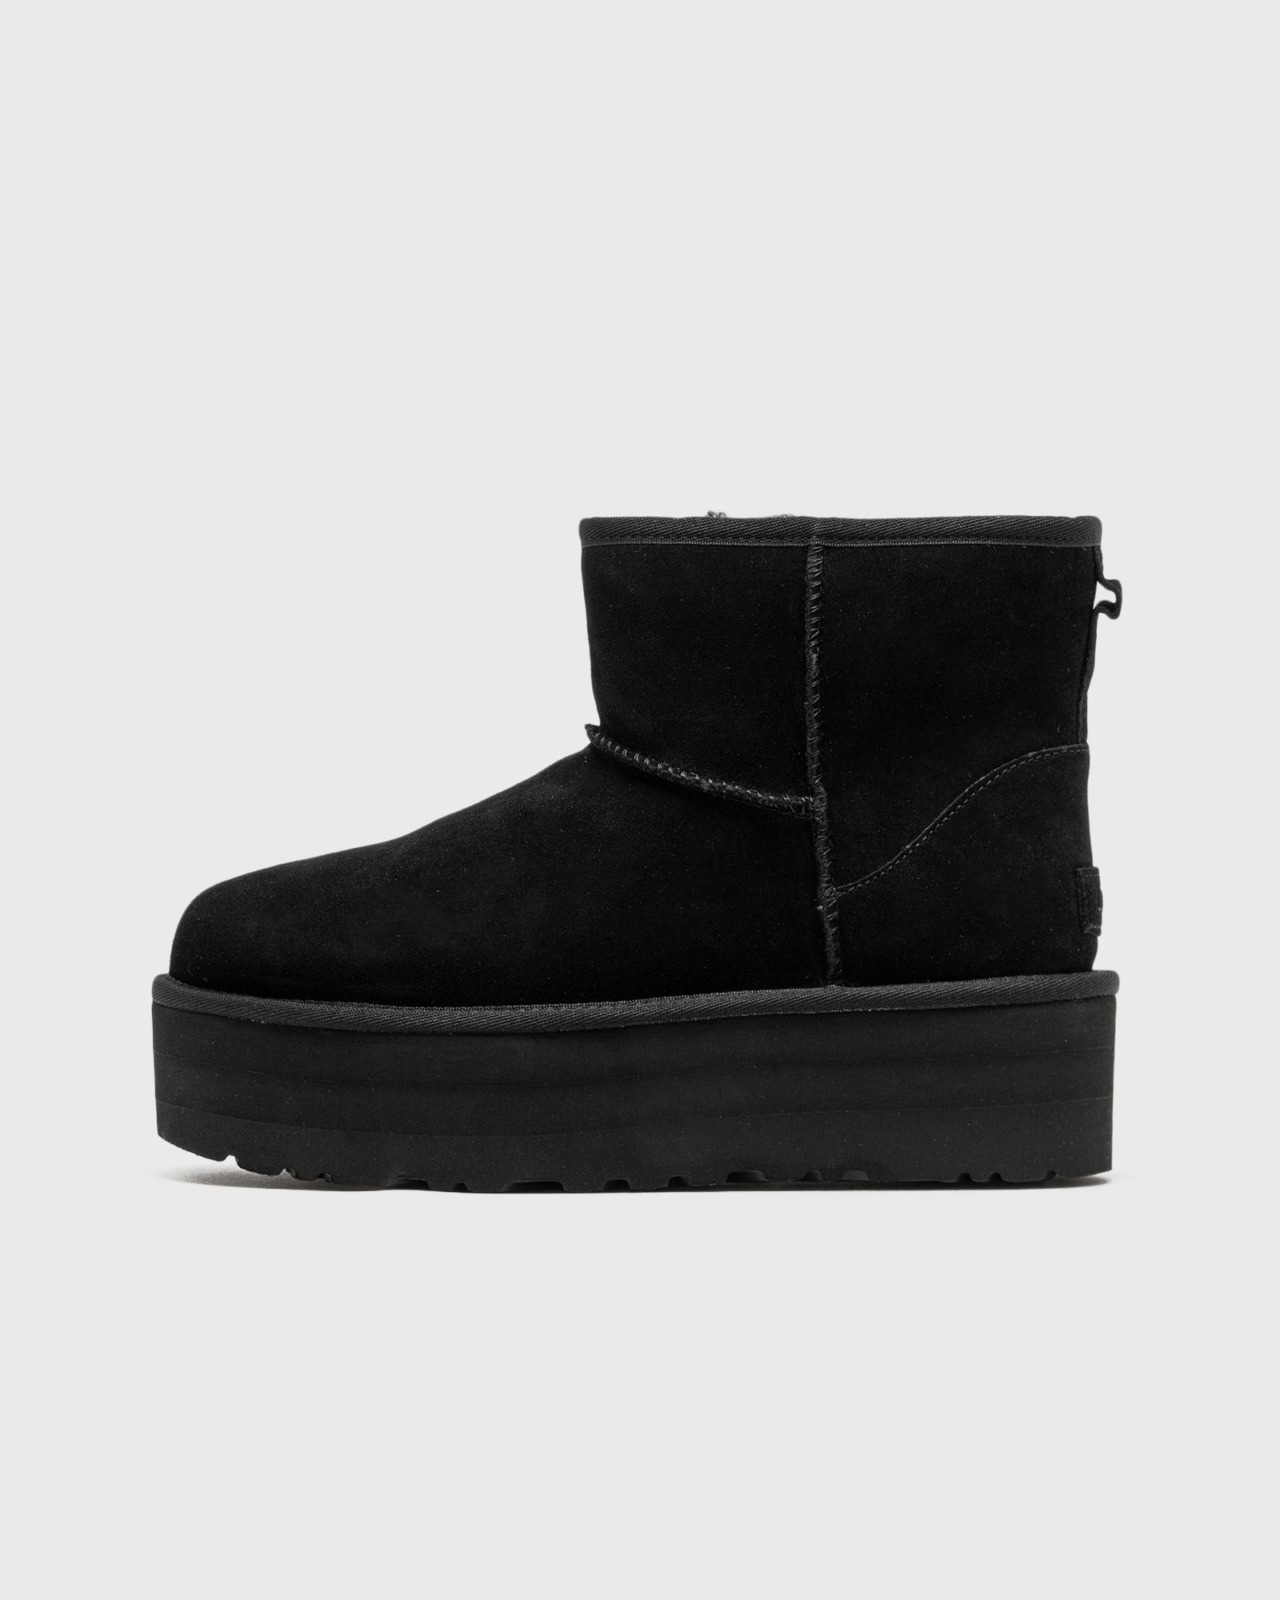 Black Boots for Women at Bstn GOOFASH